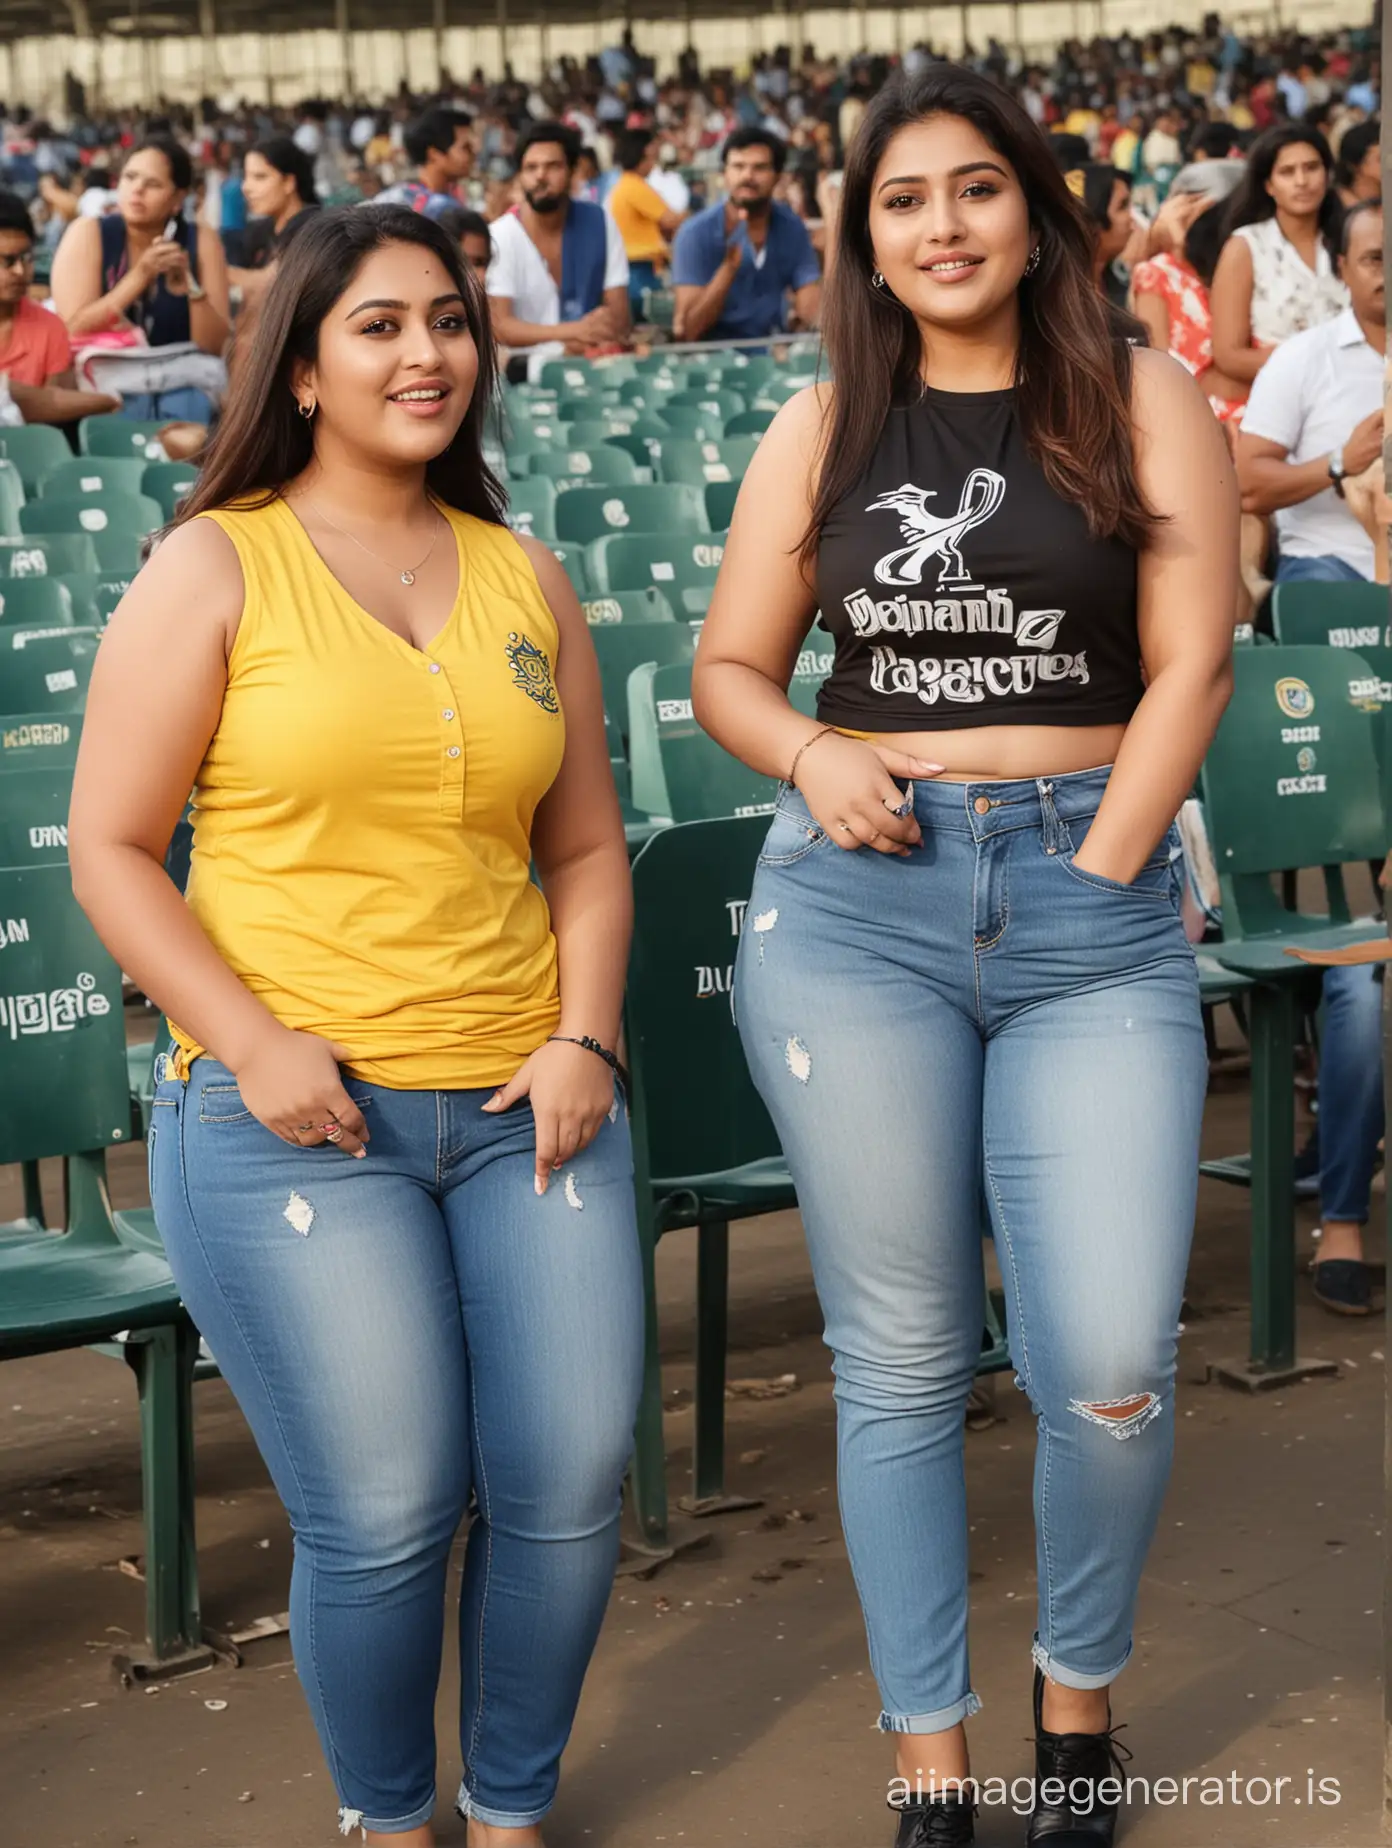 Beautiful indian plus size women wore sleeveless tops and jeans watching ipl at cricket stadium